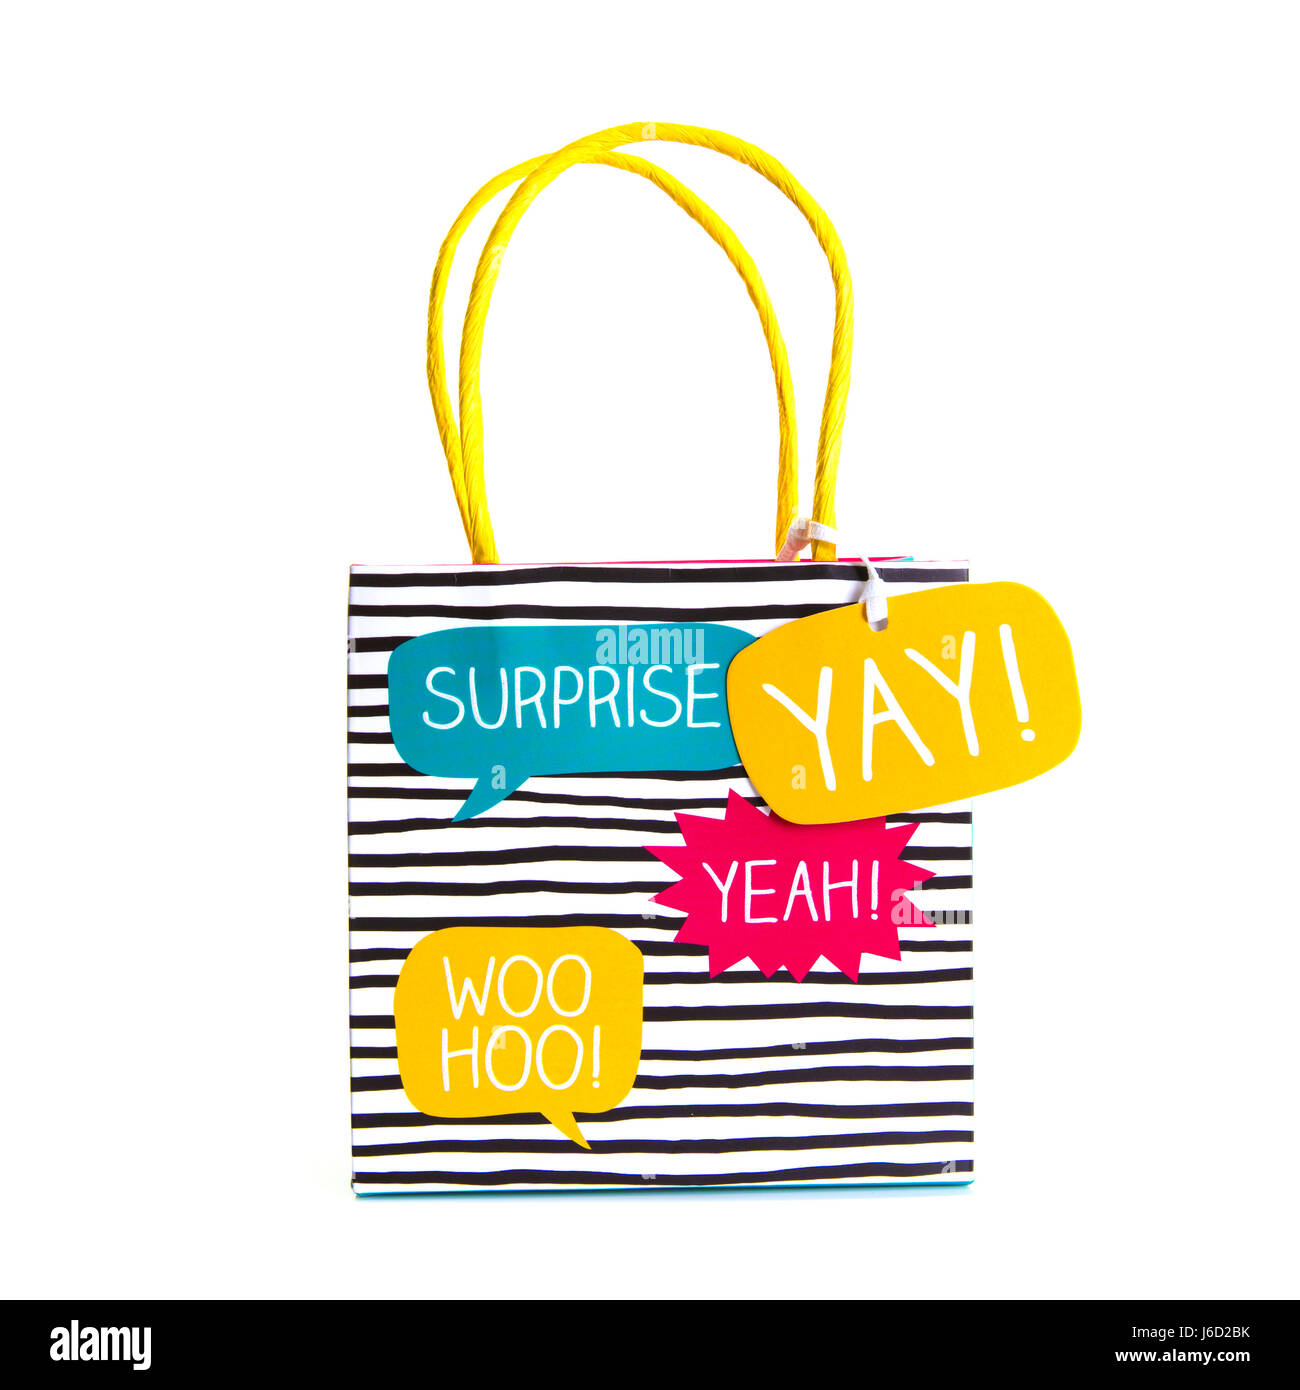 SWINDON, UK - MAY 20, 2017: Gift Bag with Surprise, Yay, Woo Hoo and Yeah ! on a white background Stock Photo